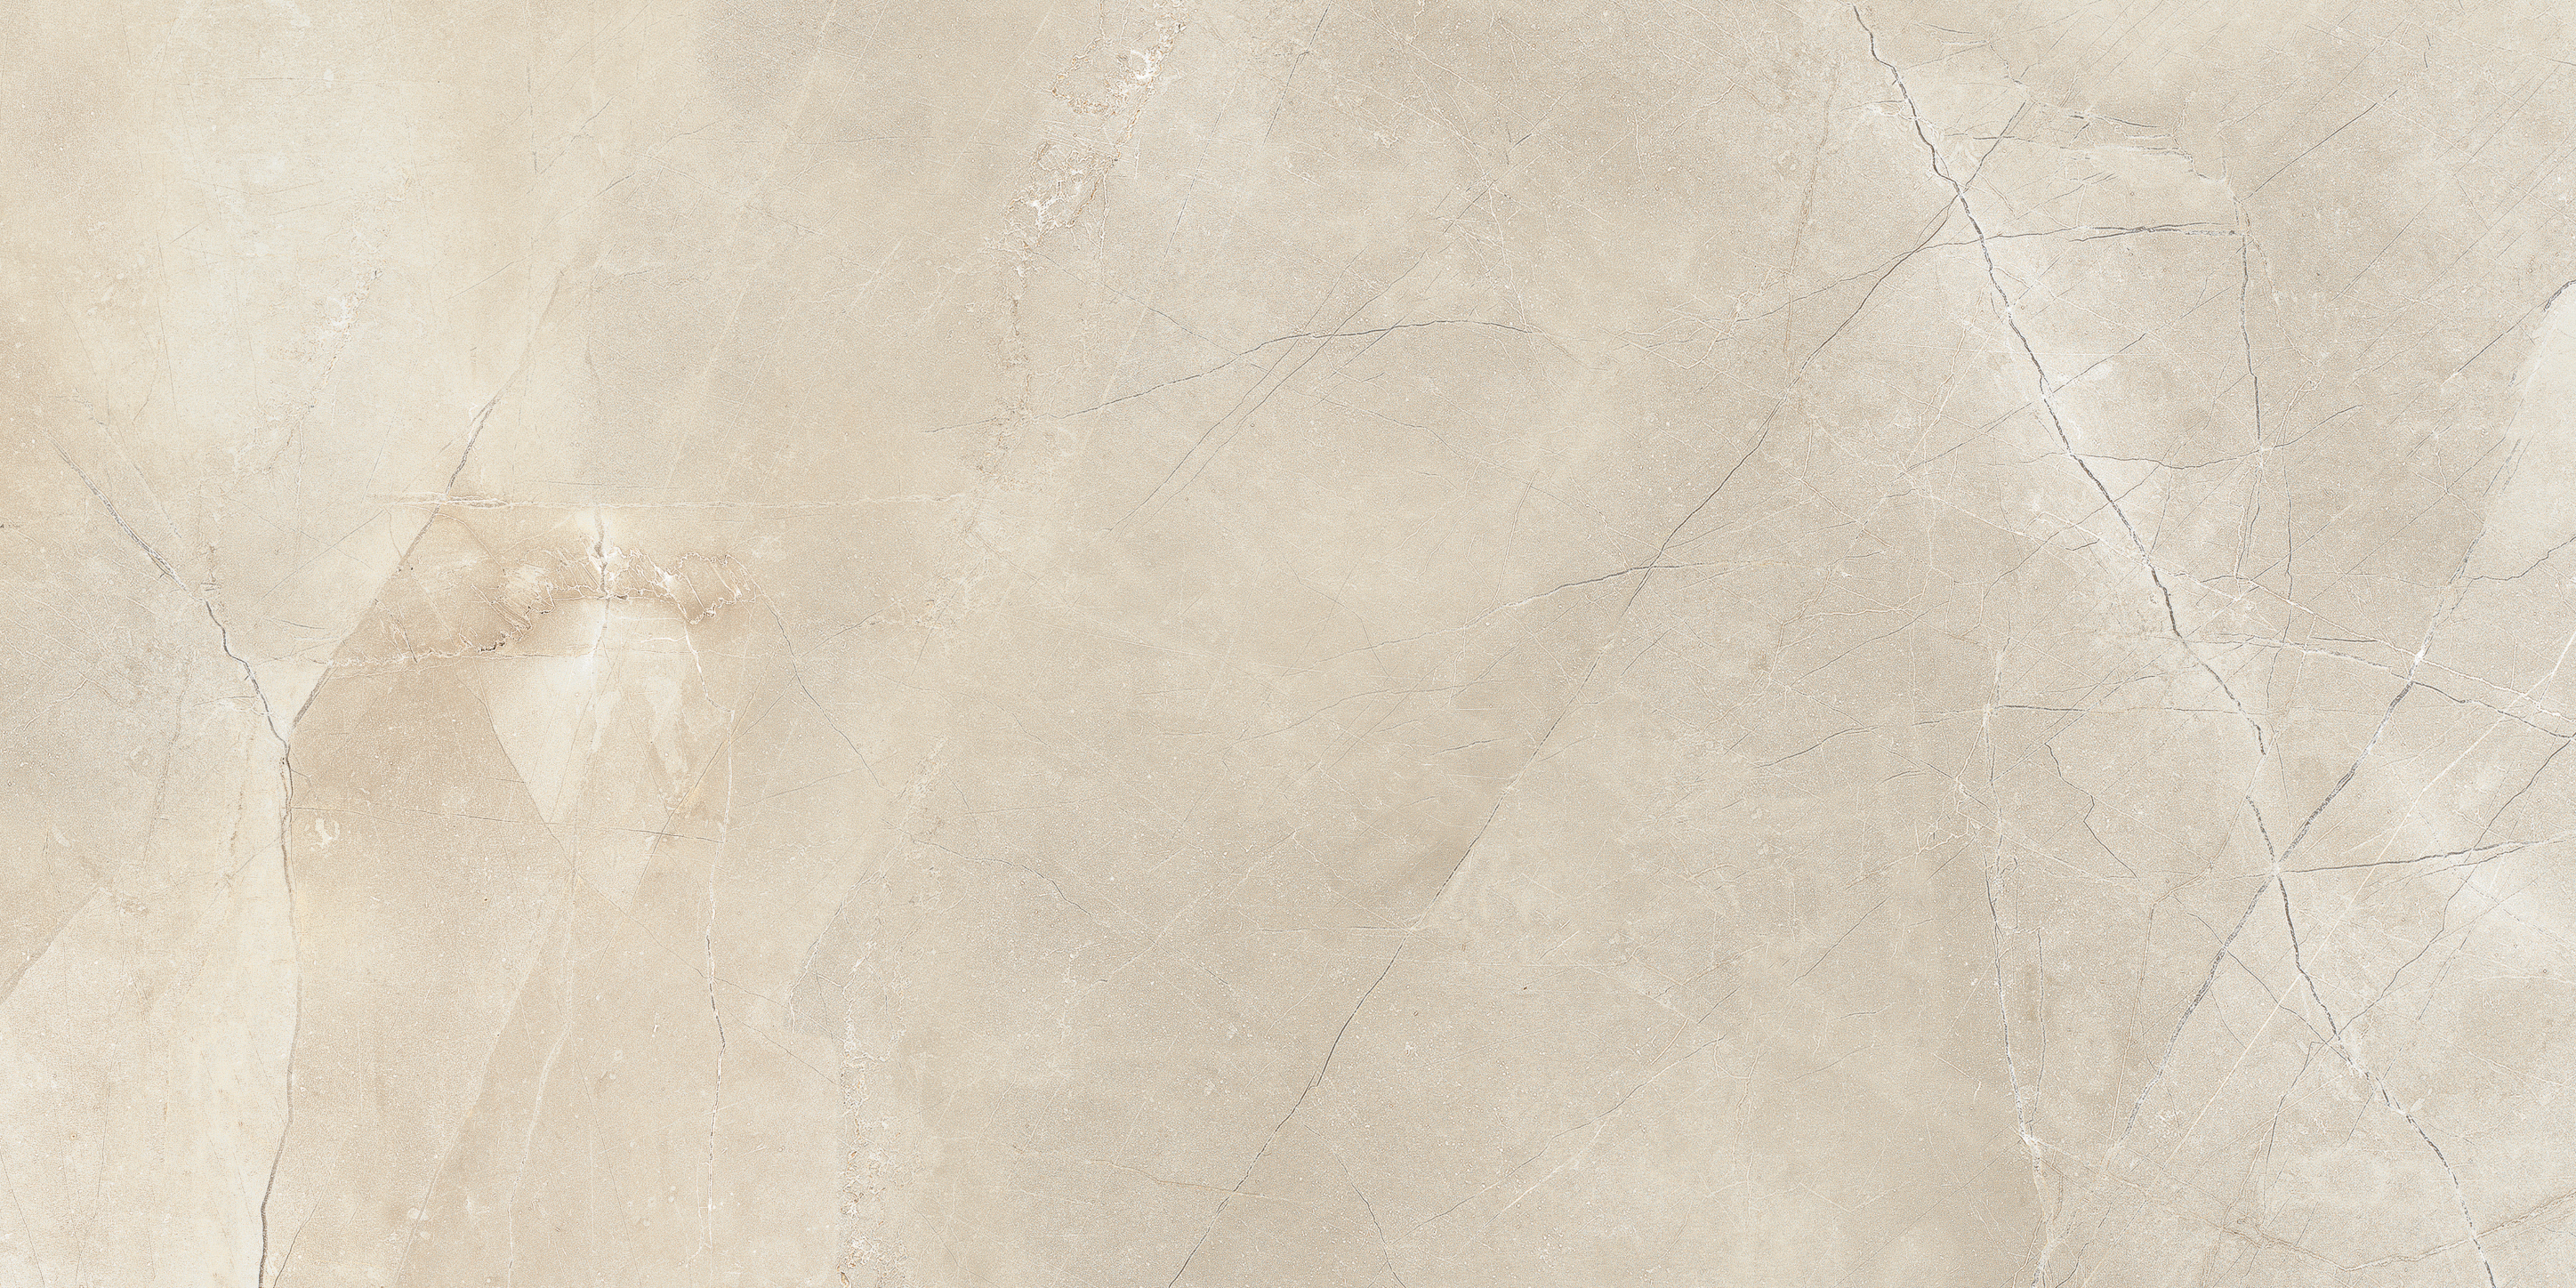 pulpis ivory pattern glazed porcelain field tile from classic anatolia collection distributed by surface group international matte finish pressed edge 12x24 rectangle shape